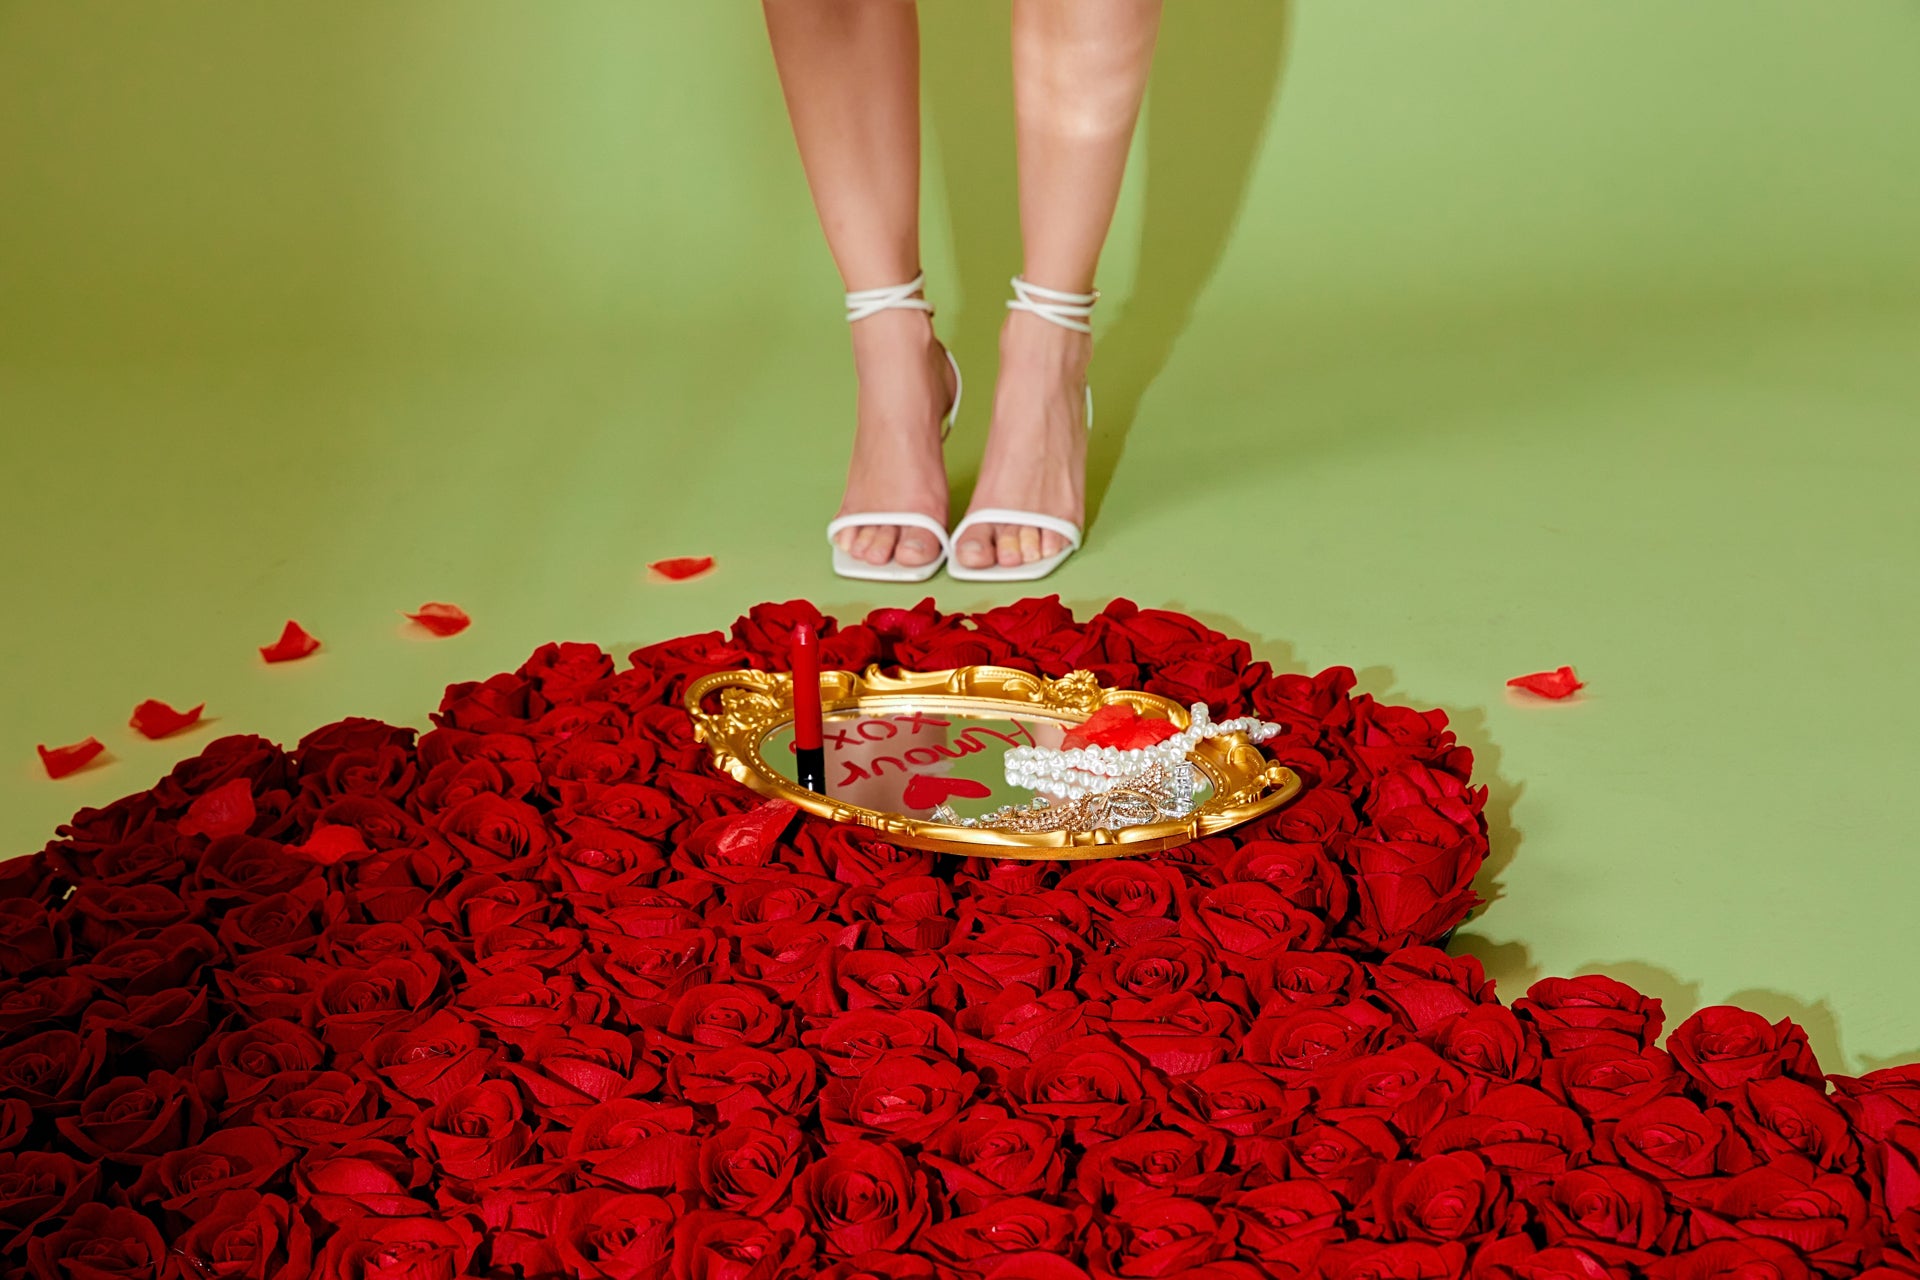 Endless Rose The 'Love Me' Editorial